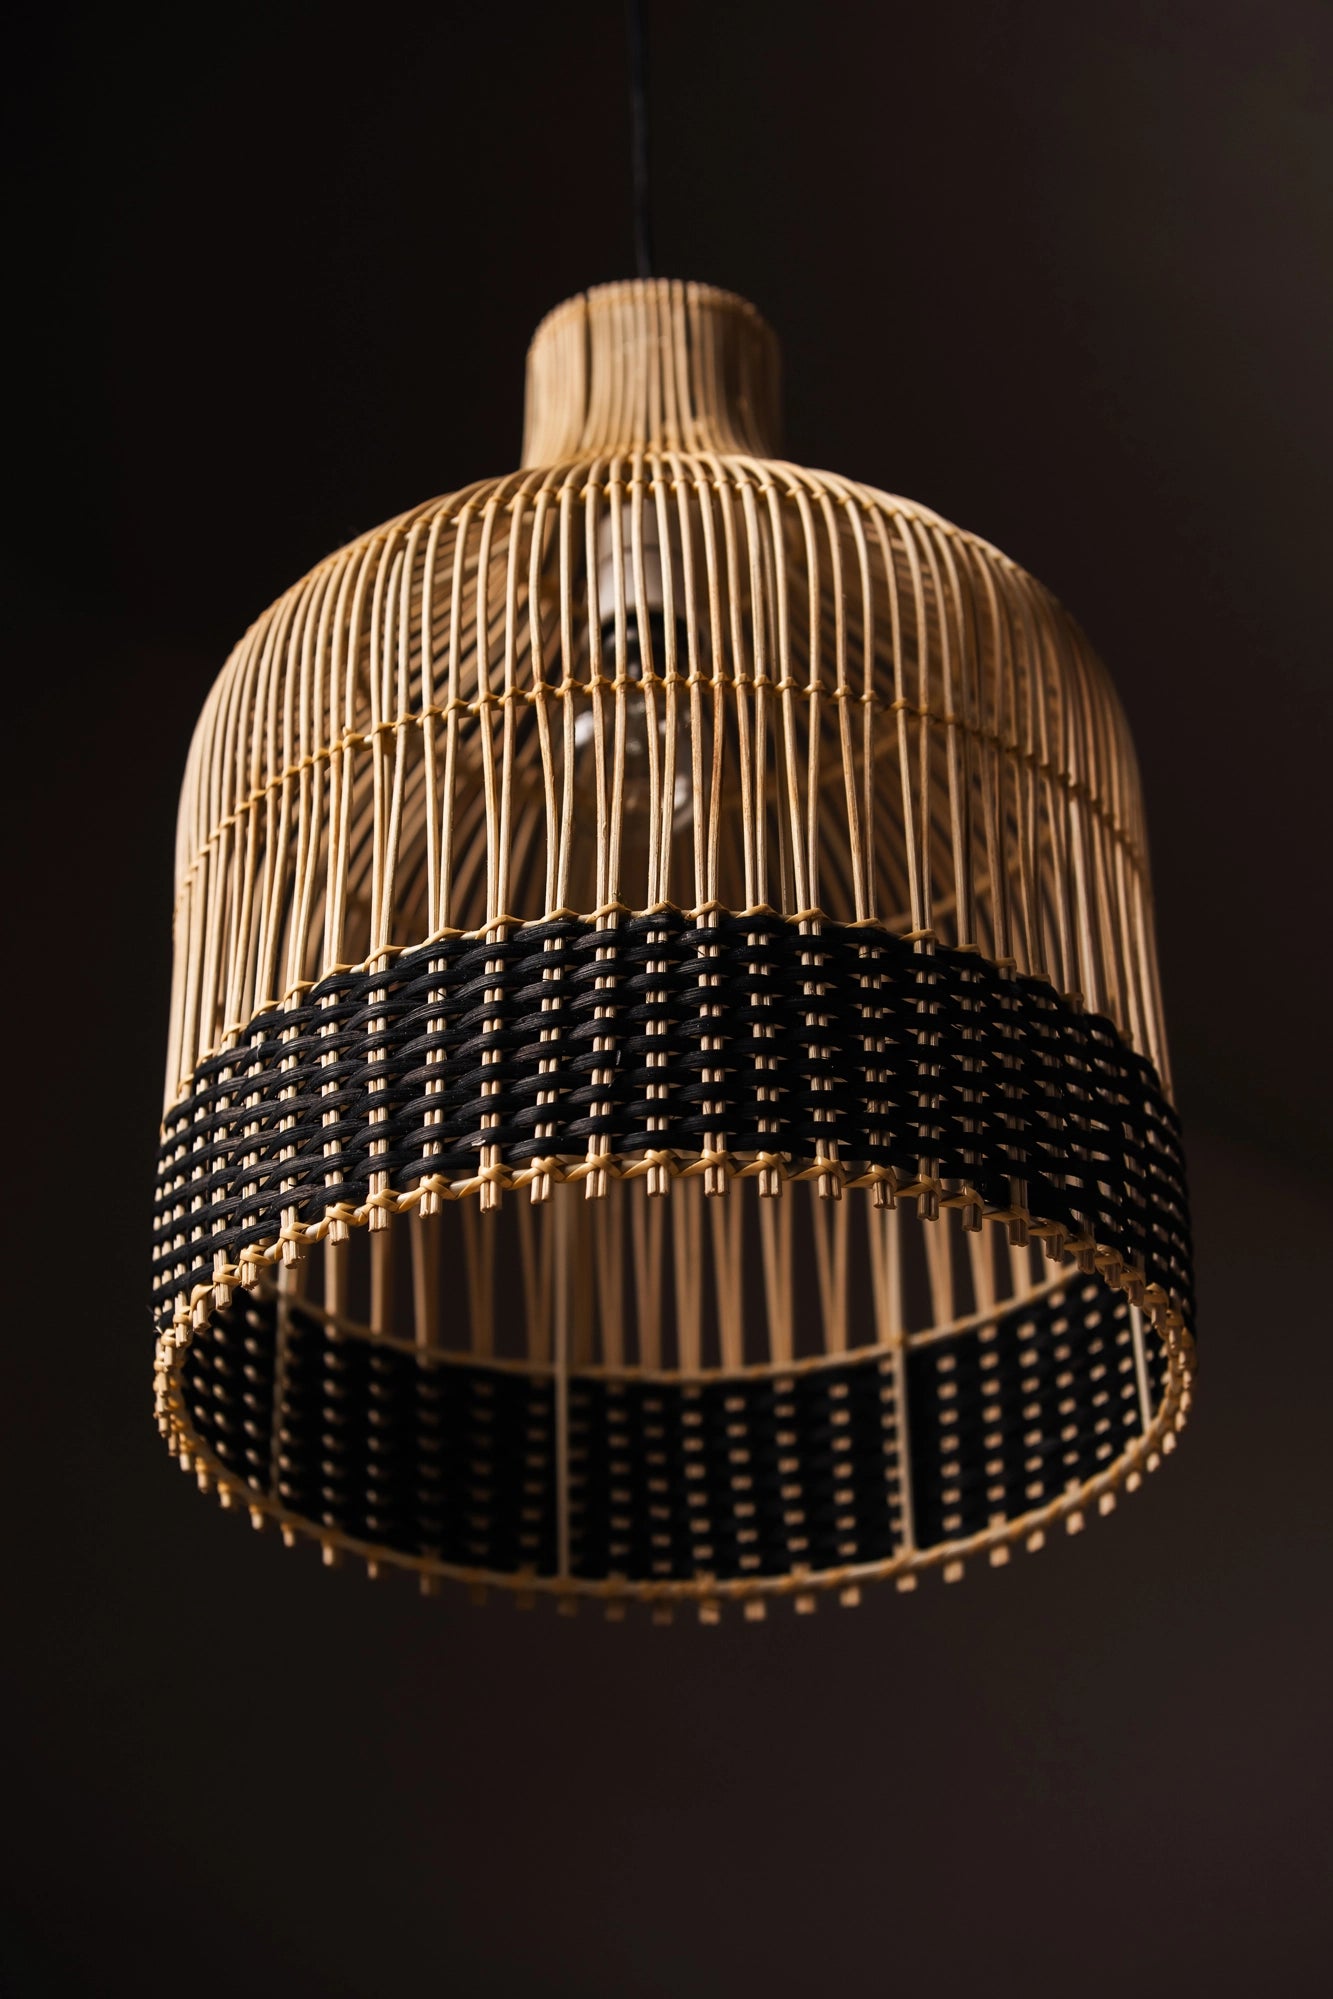  Artisan-made lampshade, Bedroom lighting solution, Bohemian pendant lamp, Bohemian chic lighting, Child's room décor, Coastal home décor, Covered patio lighting, Expertly crafted pendant, Handcrafted rattan pendant, Living space lighting, Quality rattan lighting, Rattan pendant lampshade, Rustic pendant fixture, Umbrella-shaped pendant light, Versatile ceiling light, TESU